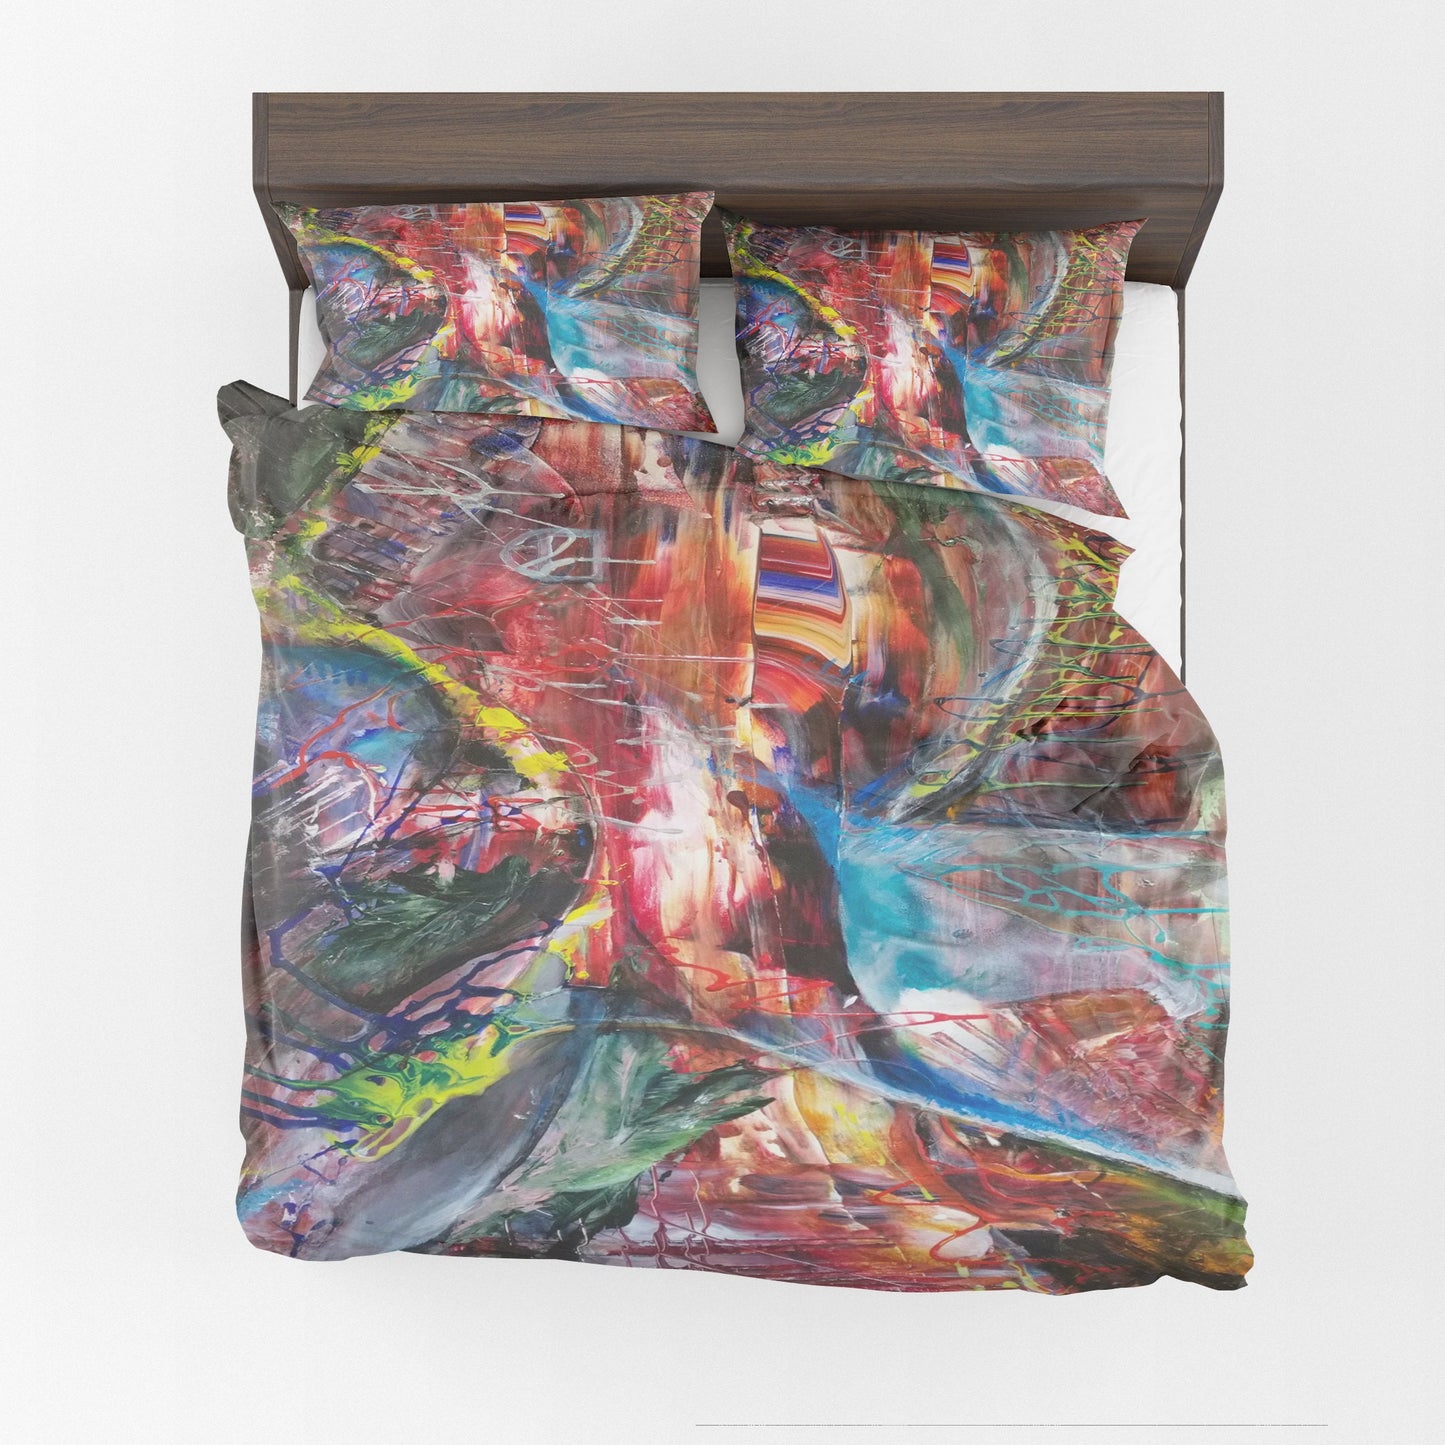 Abstract Art Duvet Cover or Comforter Artsy Colorful bedding Twin Queen King sets Unique gift red comforter orange blue psychadelic bedding